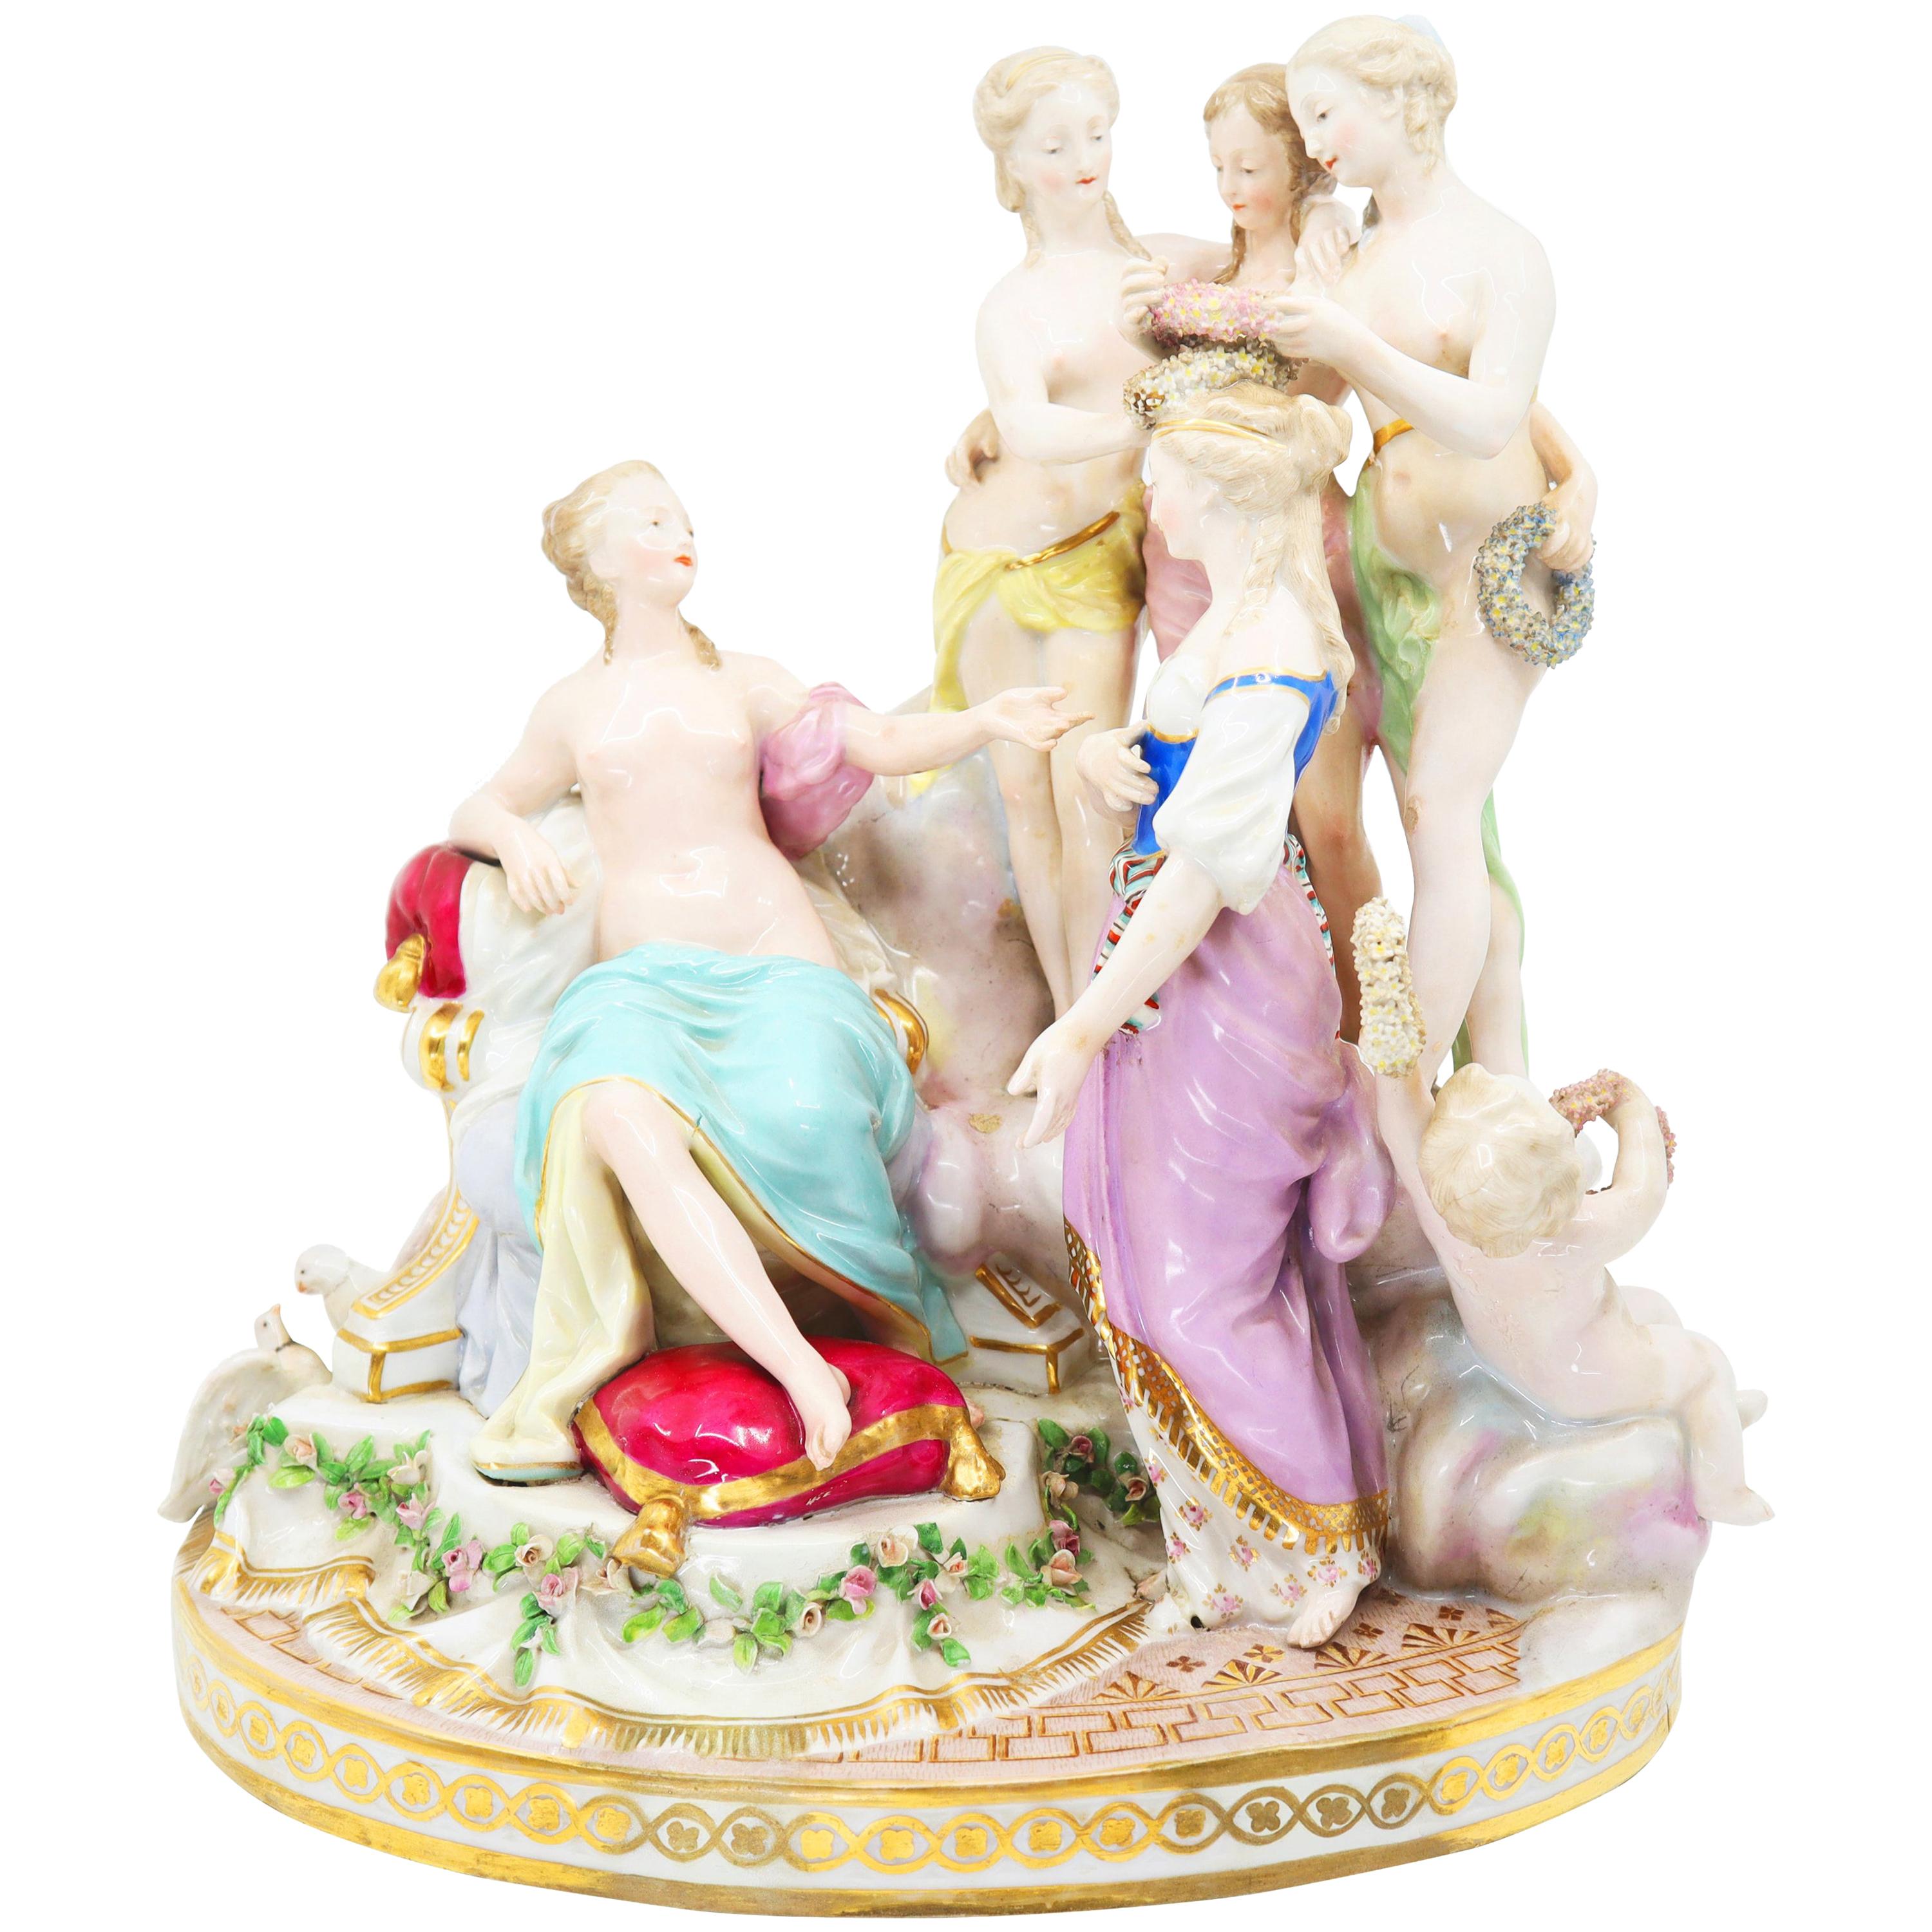 Porcelain Figure Group of Venus and Muses Samson 19th Century, Sevres French